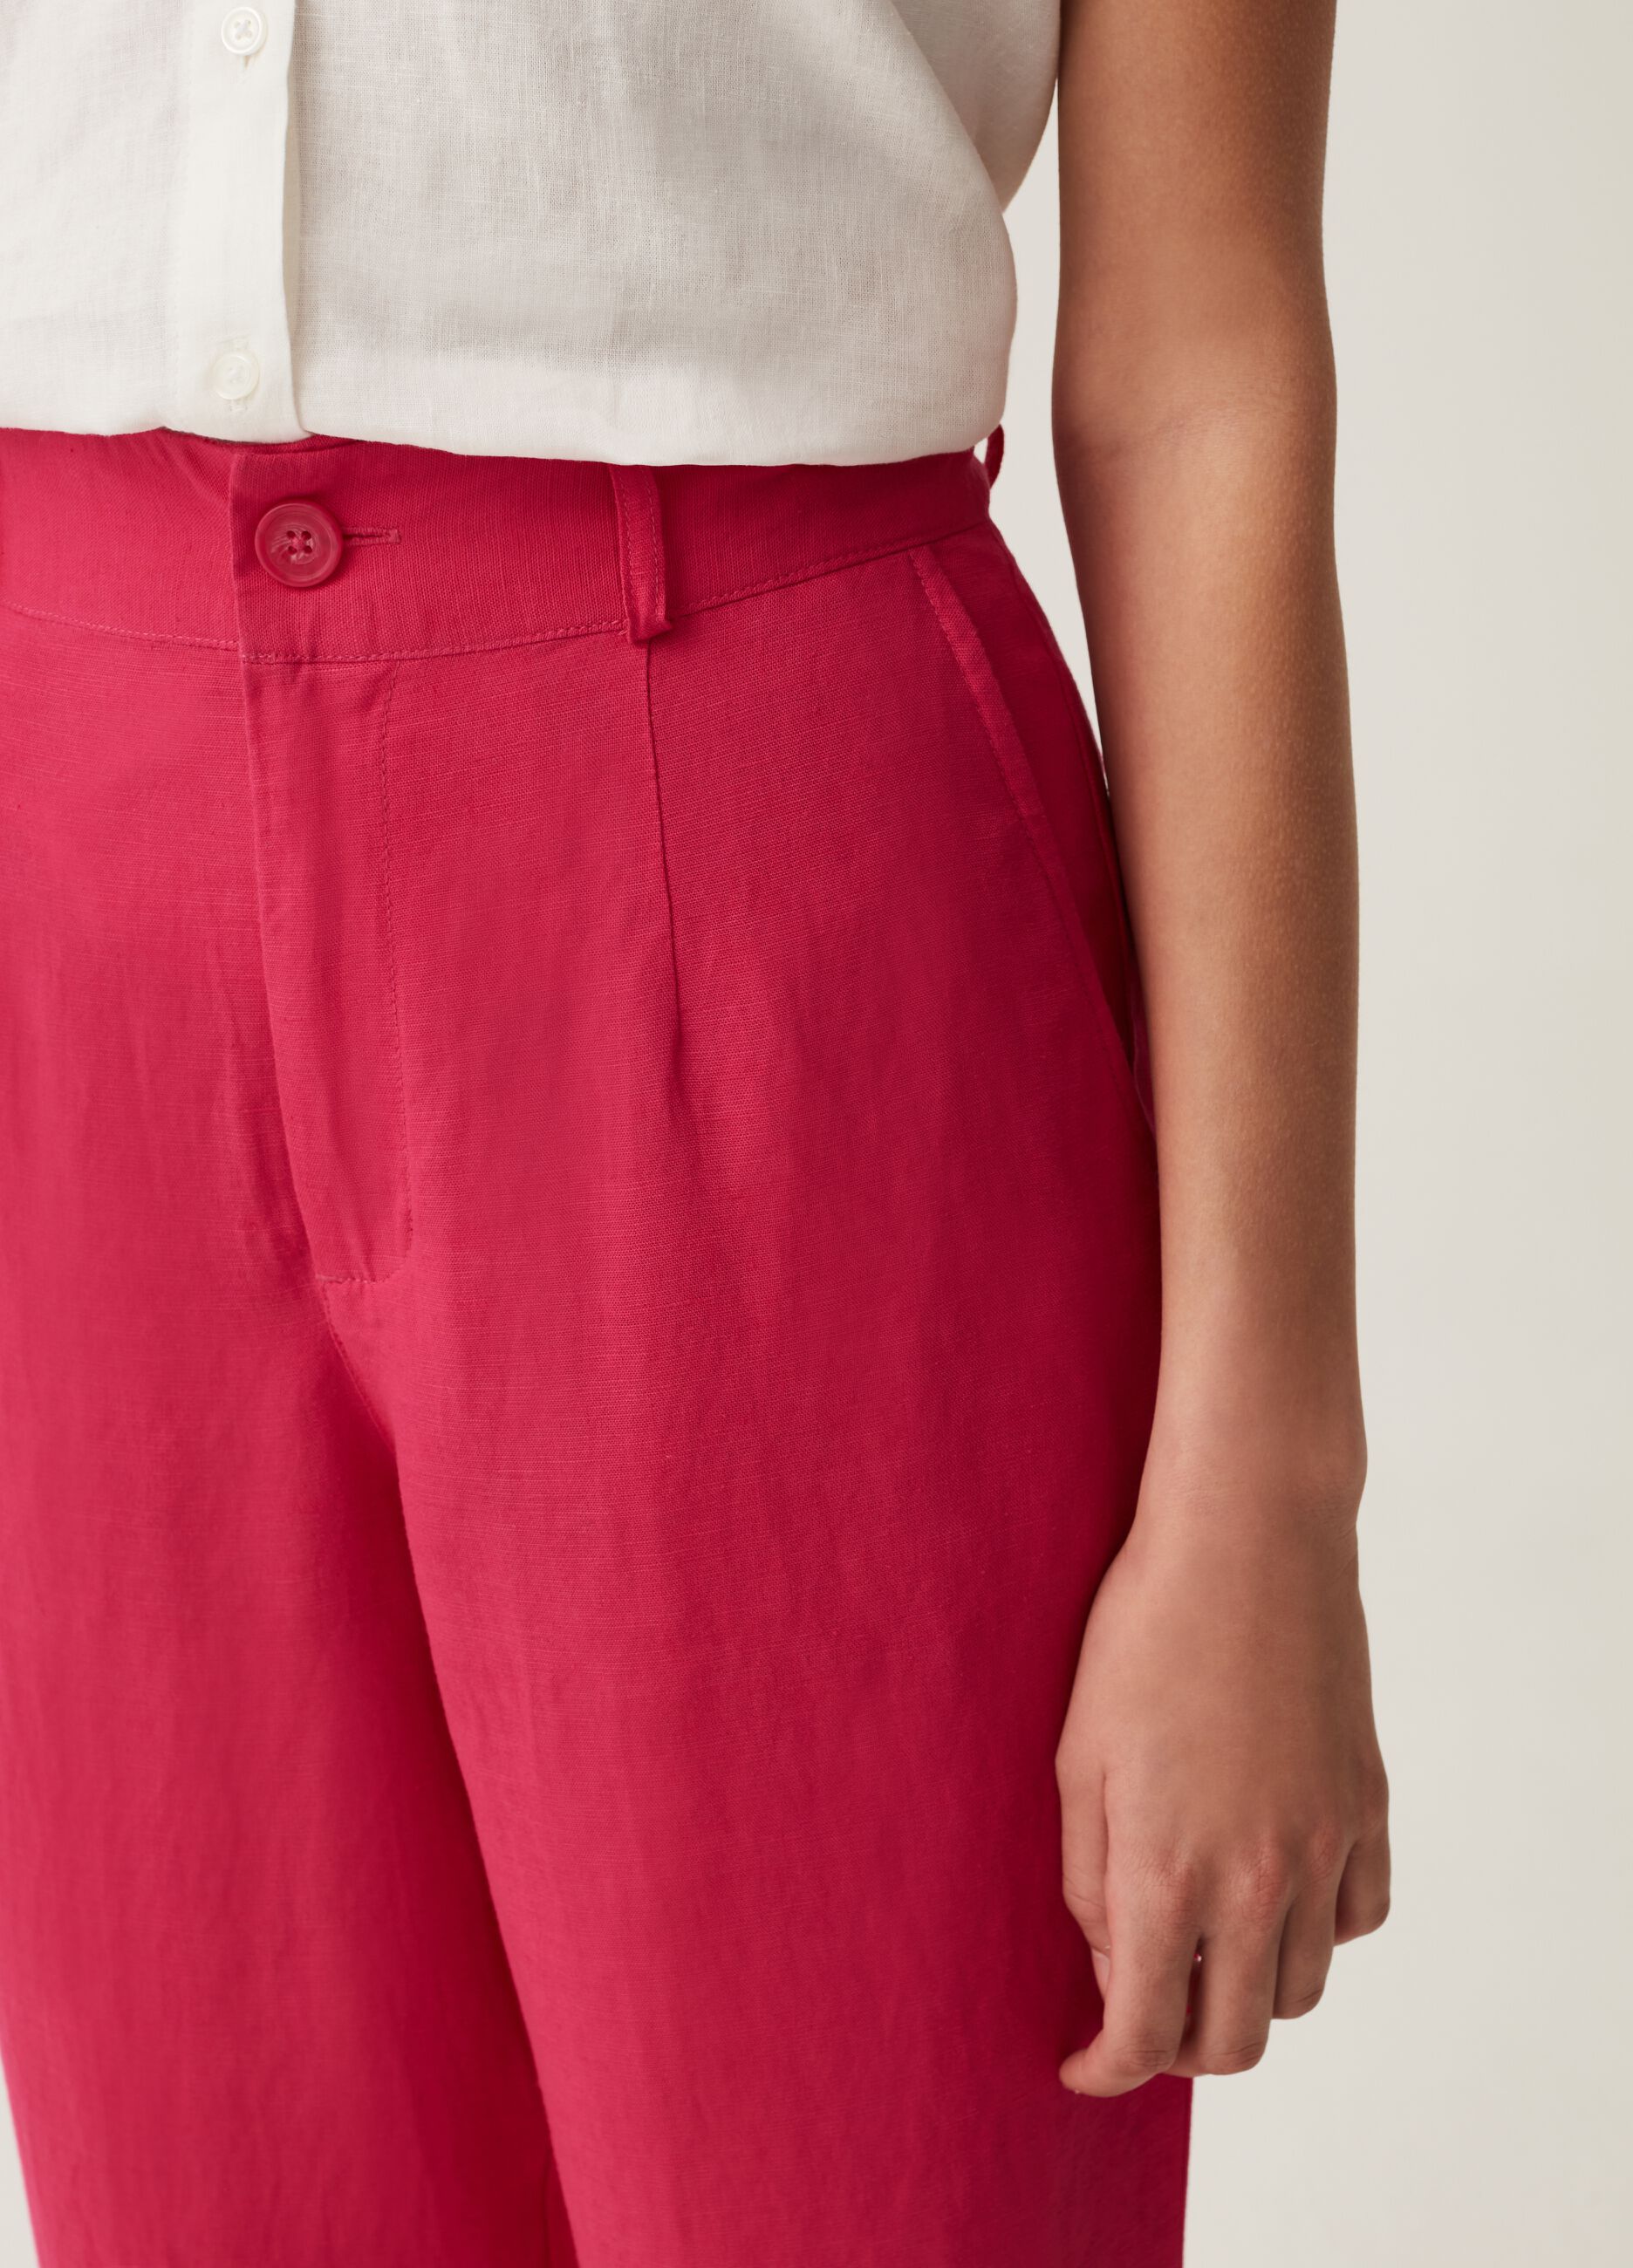 High-rise linen and viscose trousers